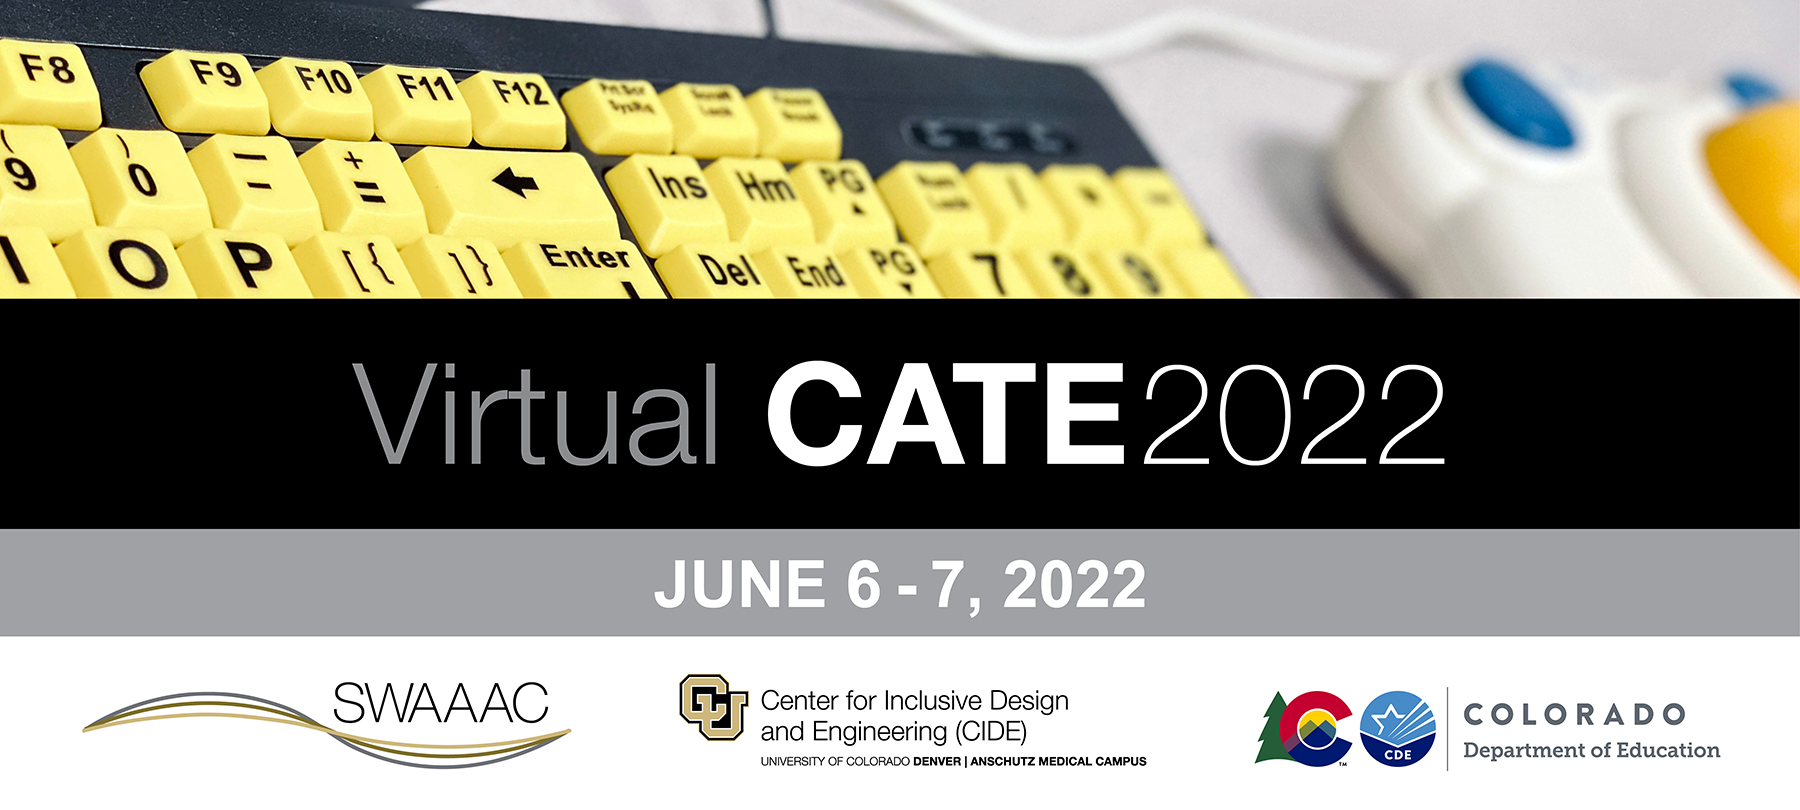 CATE Conference June 6-7 2022